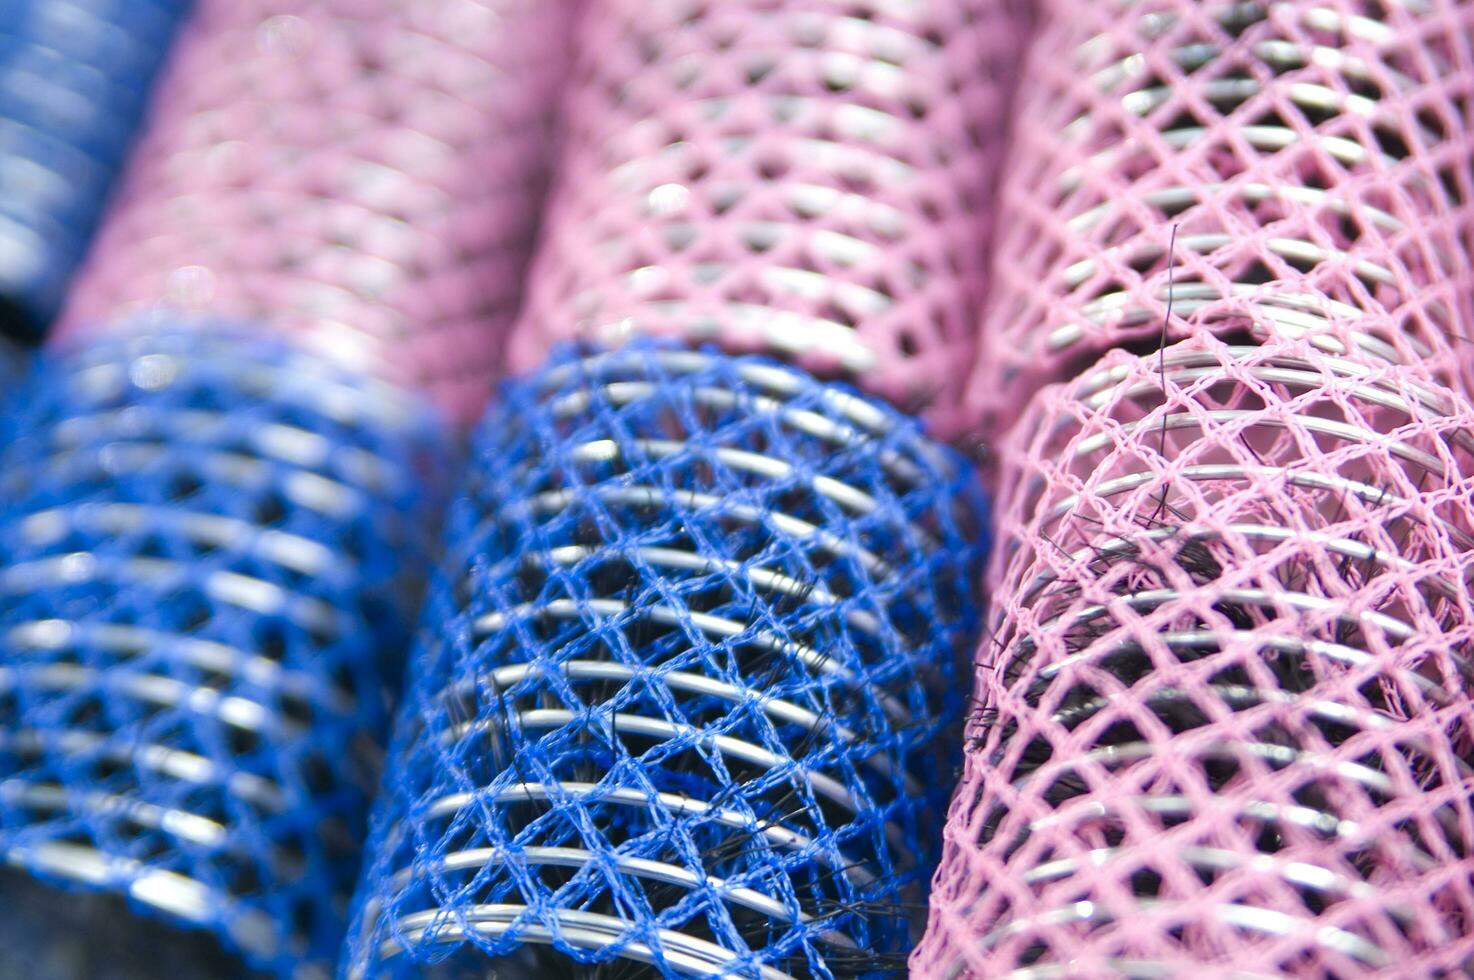 a pile of blue and pink mesh bags photo